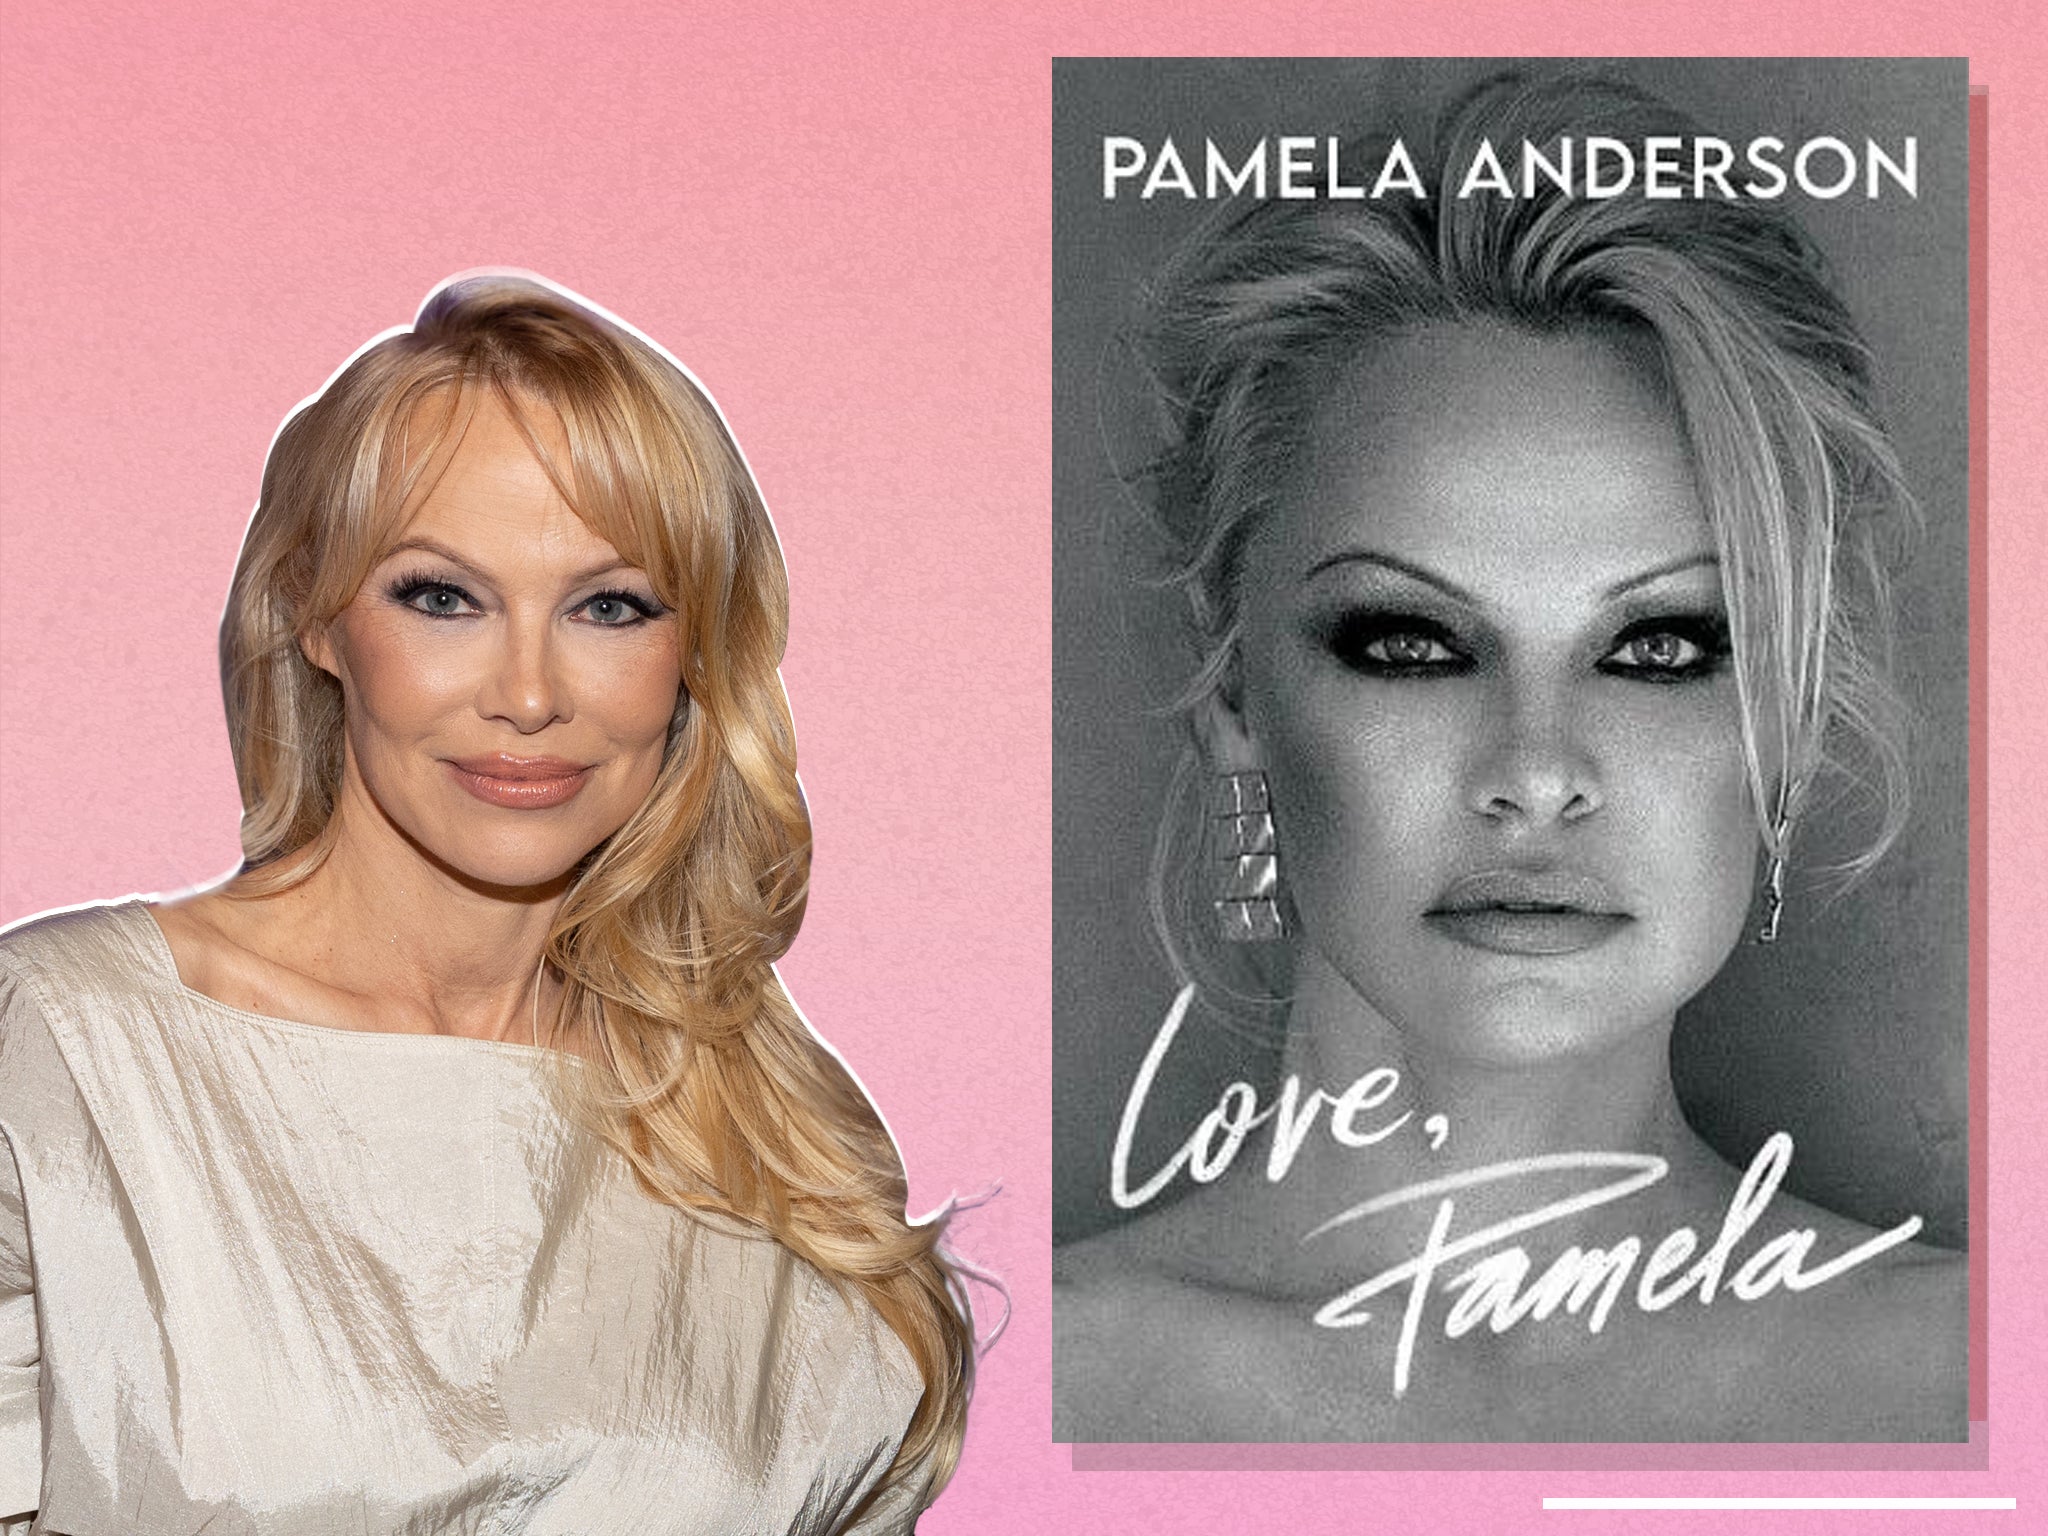 From mansion memories to rockstar relationships, ‘Love, Pamela’ is bound to be a real page-turner